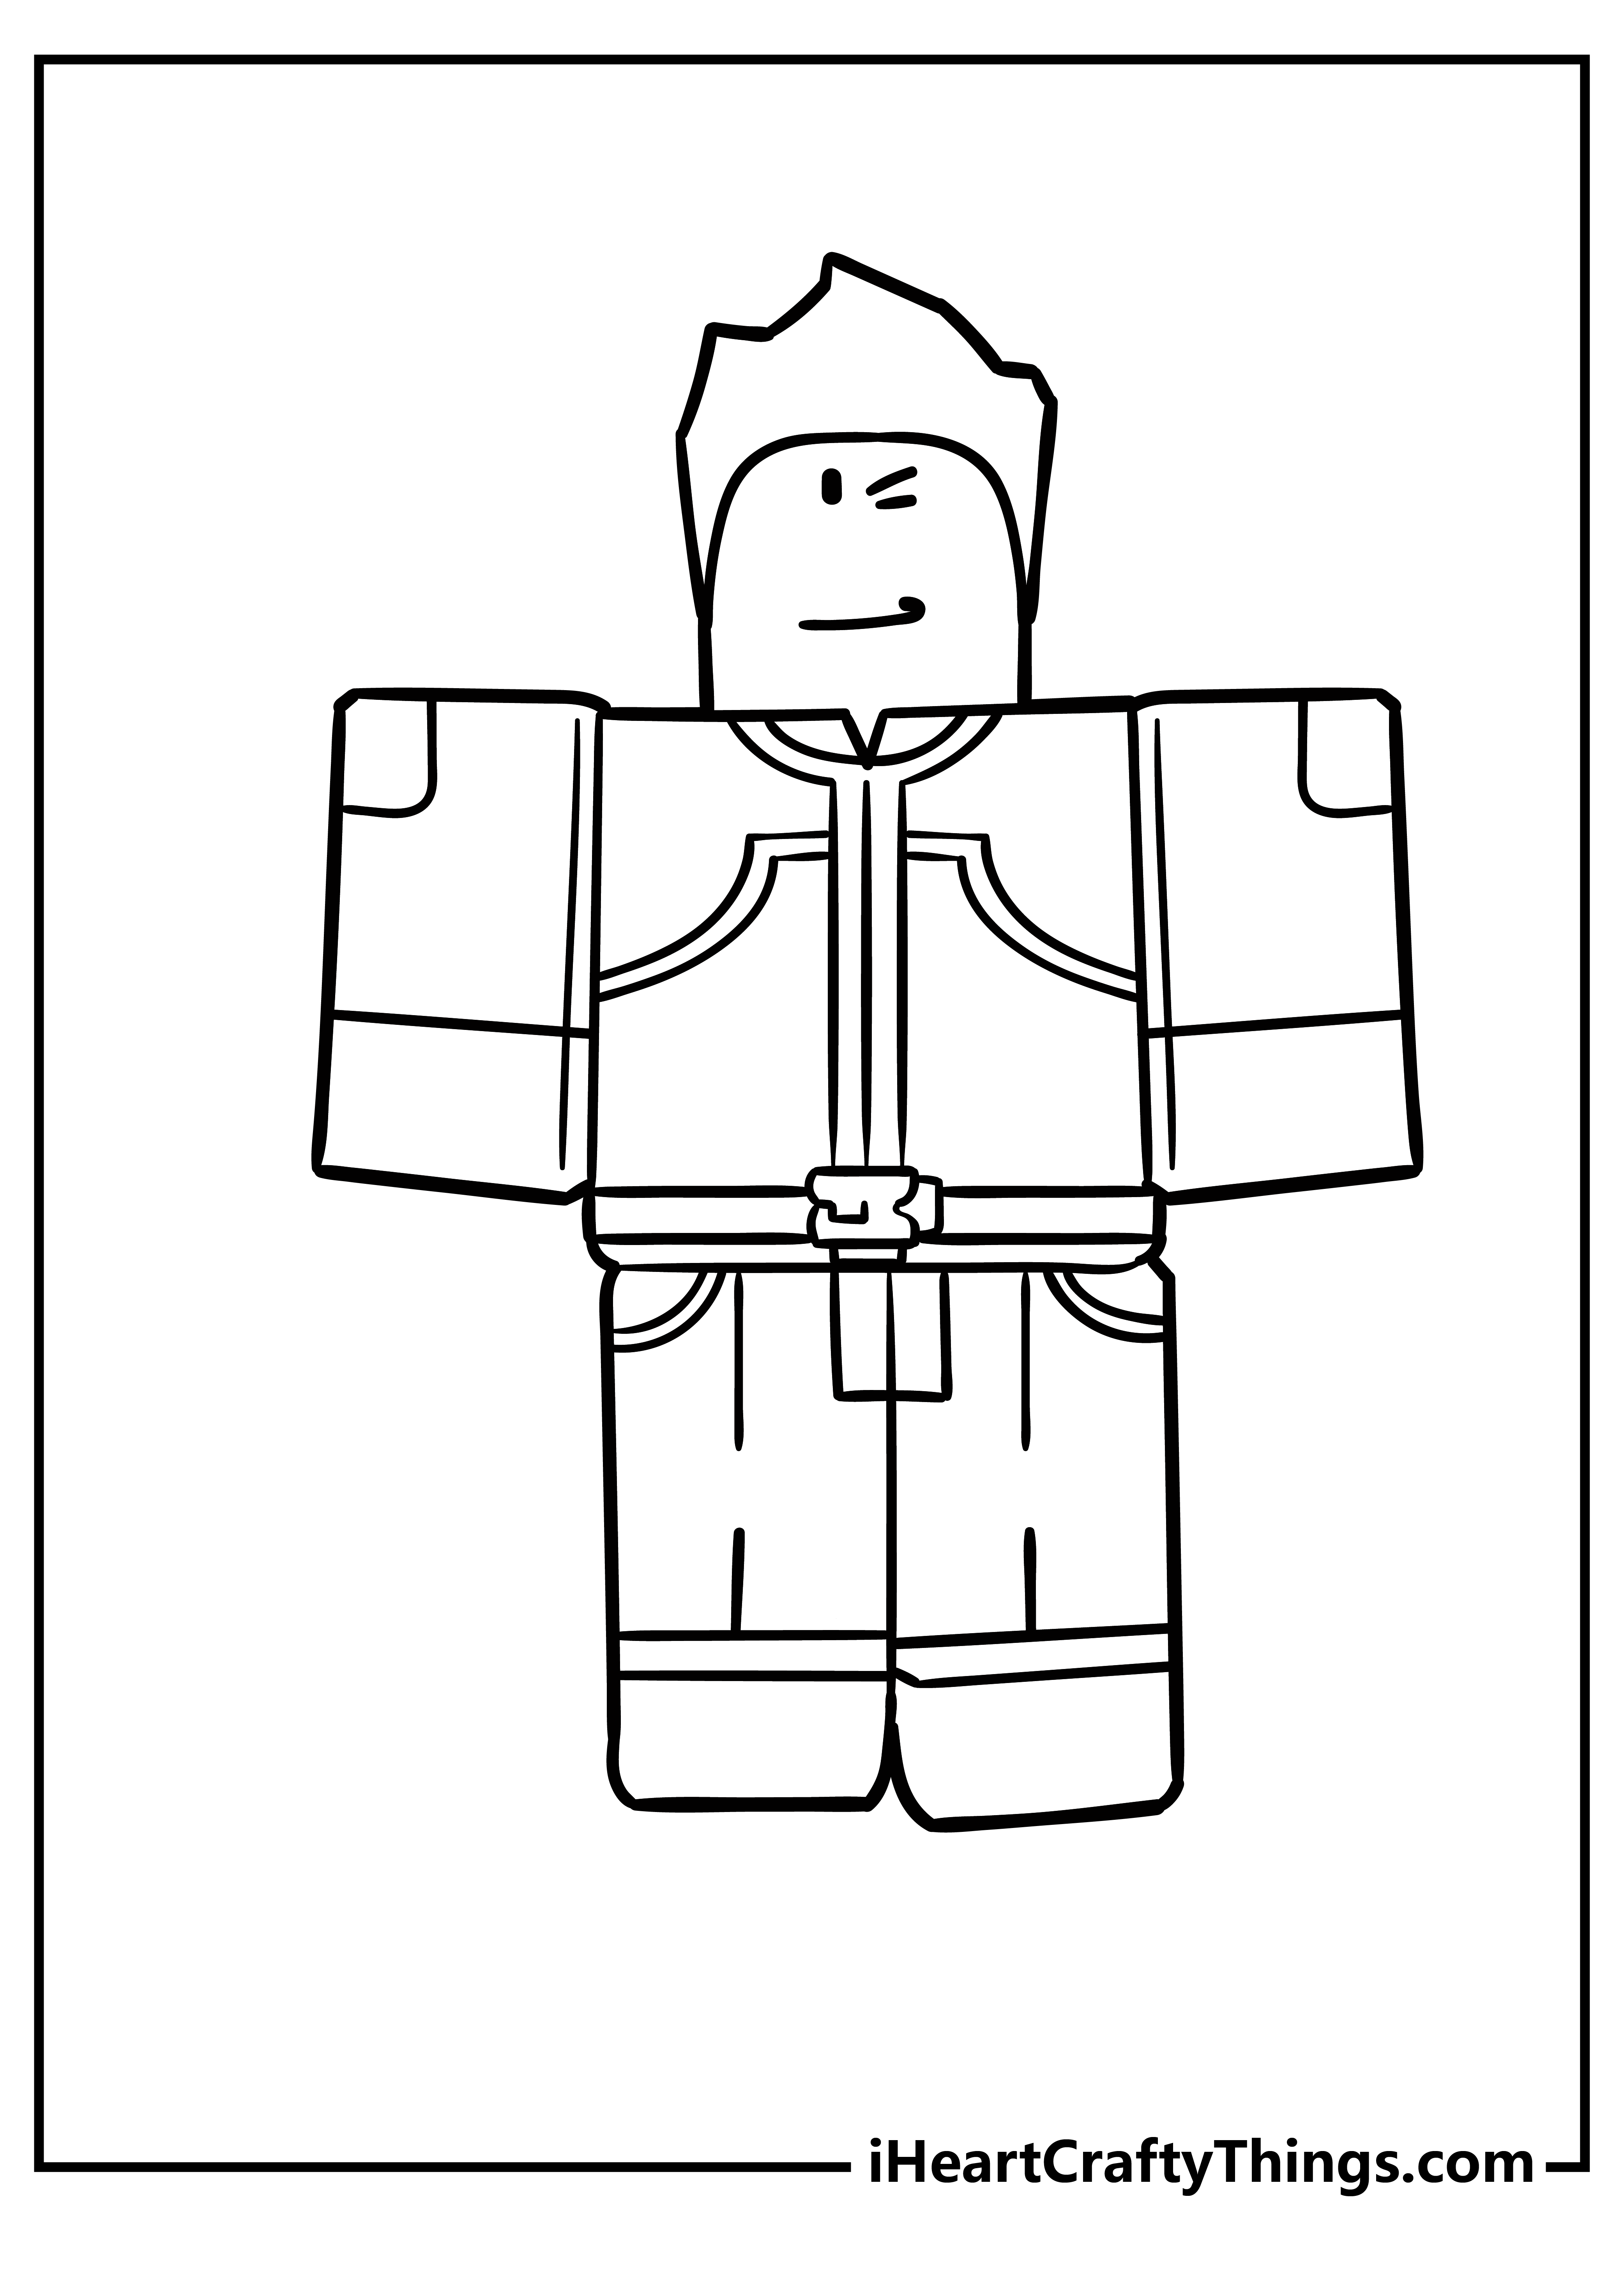 Roblox Coloring Sheet for children free download